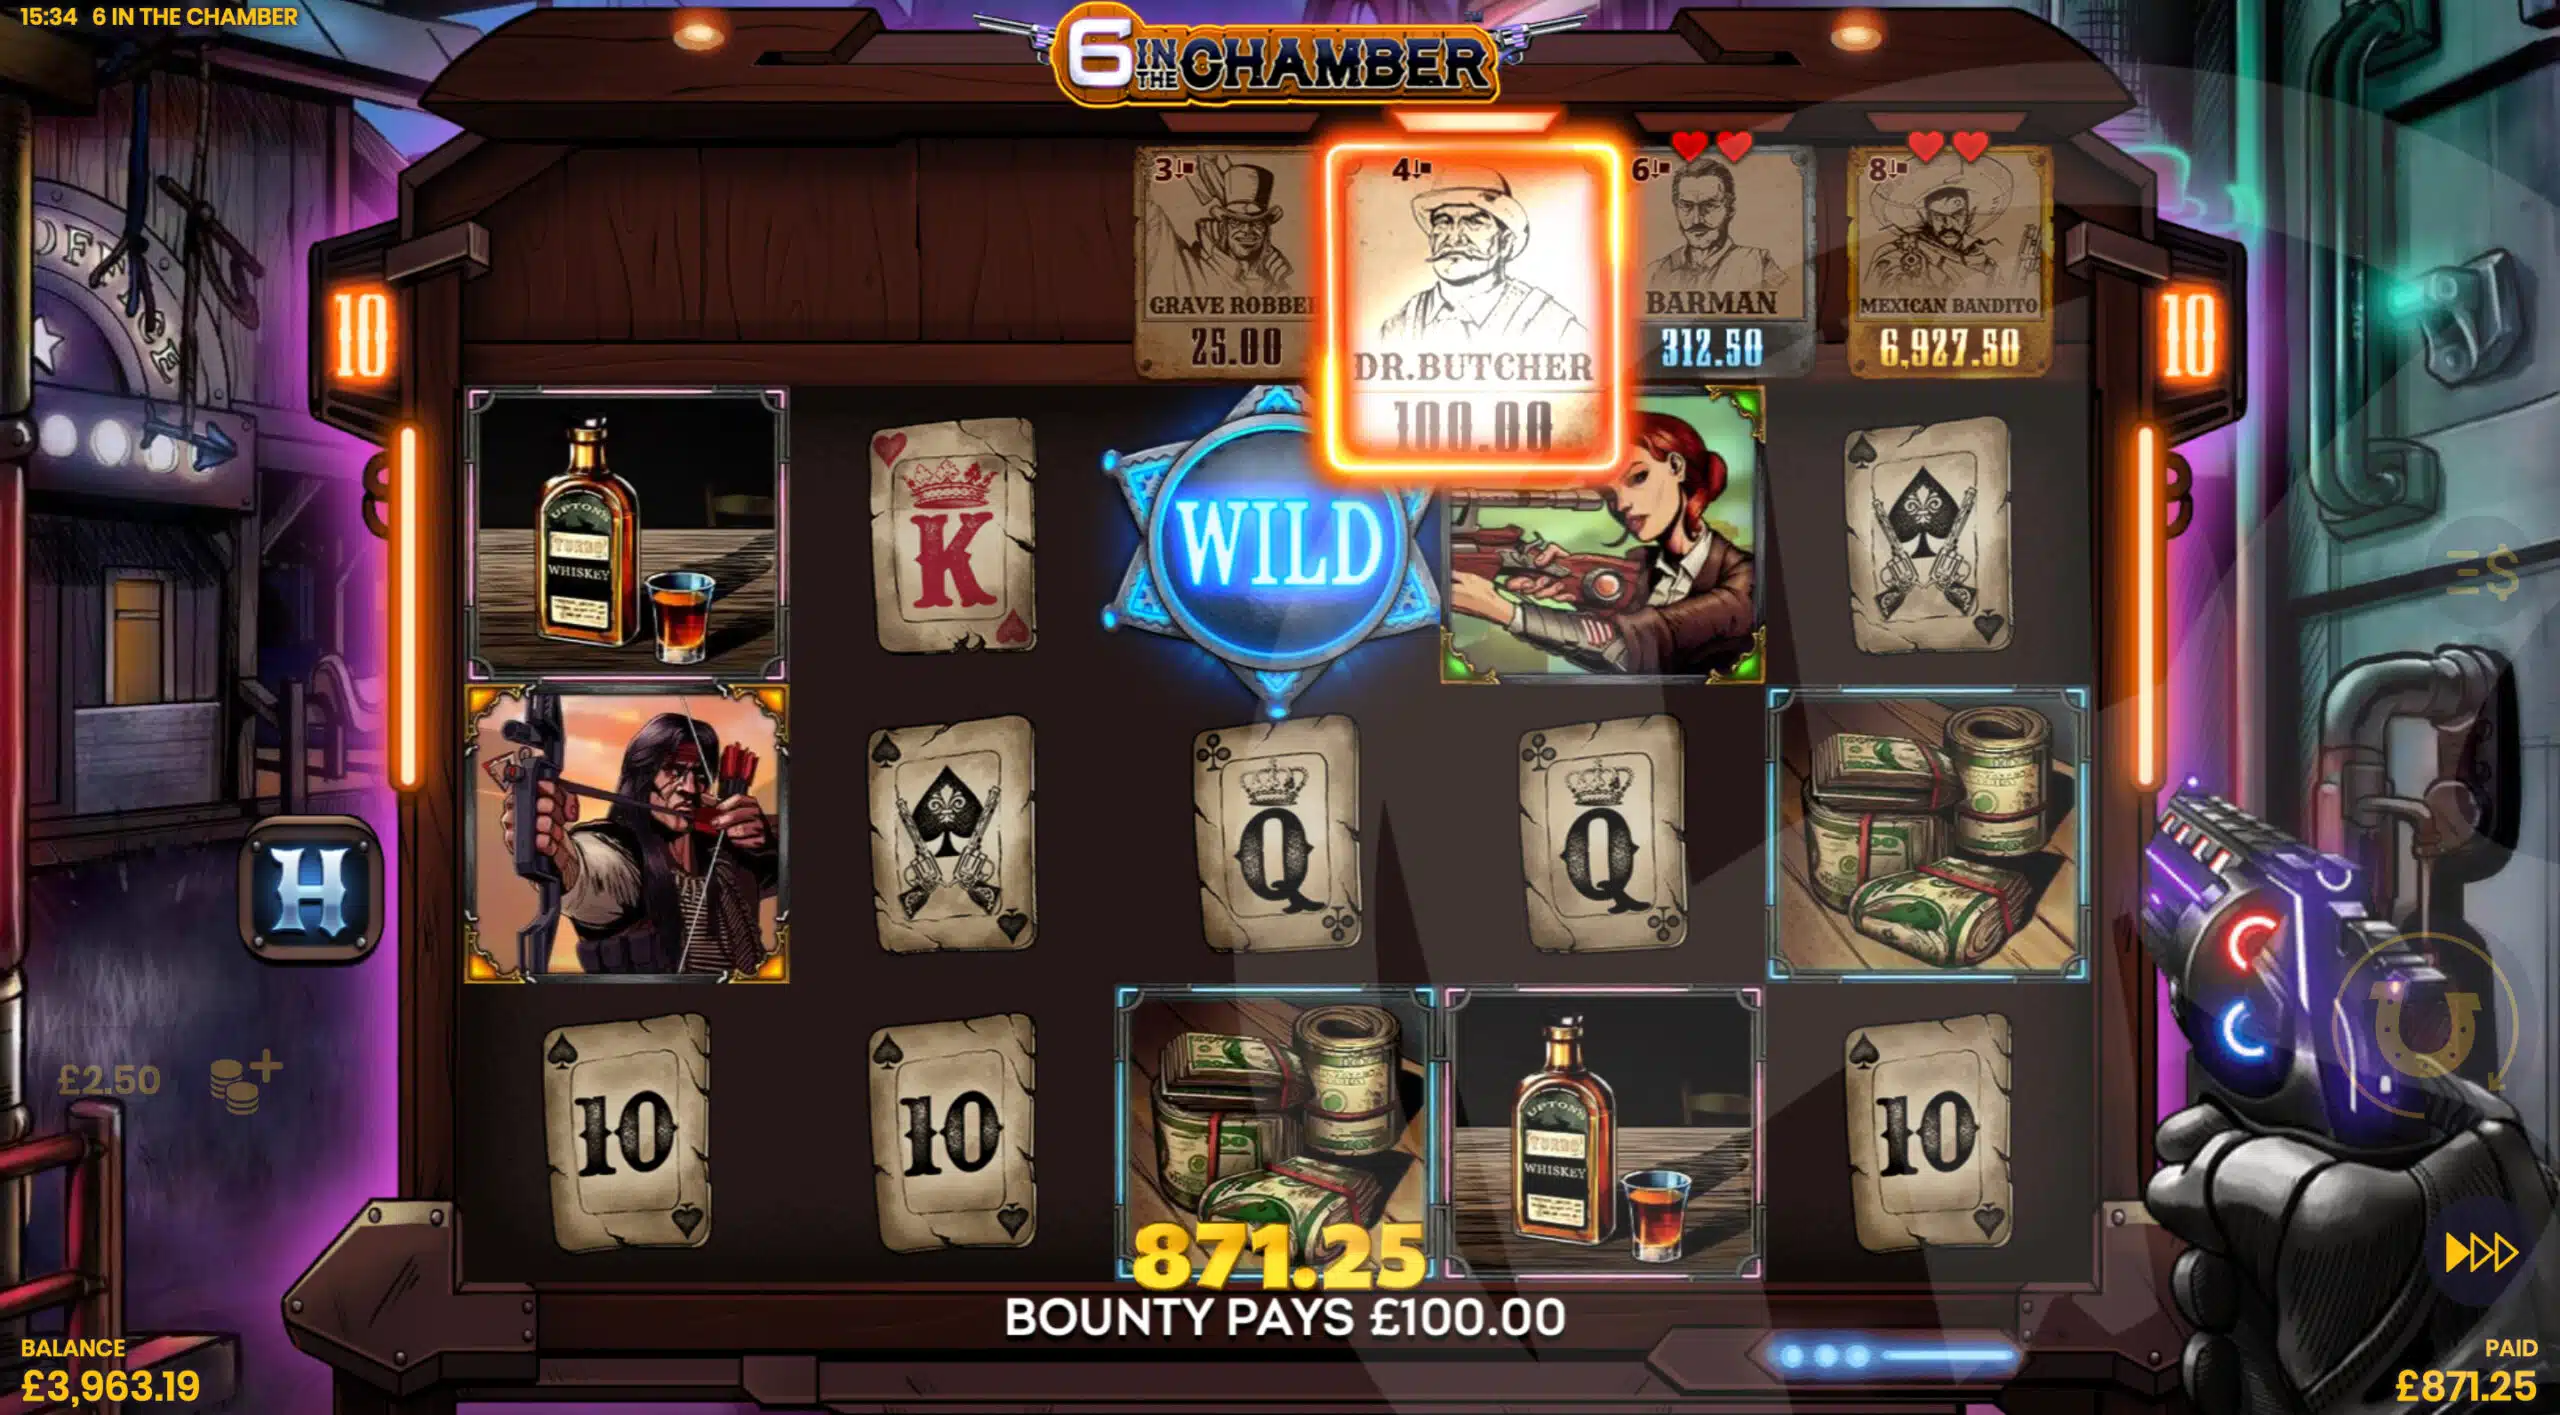 6 In The Chamber Free Spins - Hunter Mode